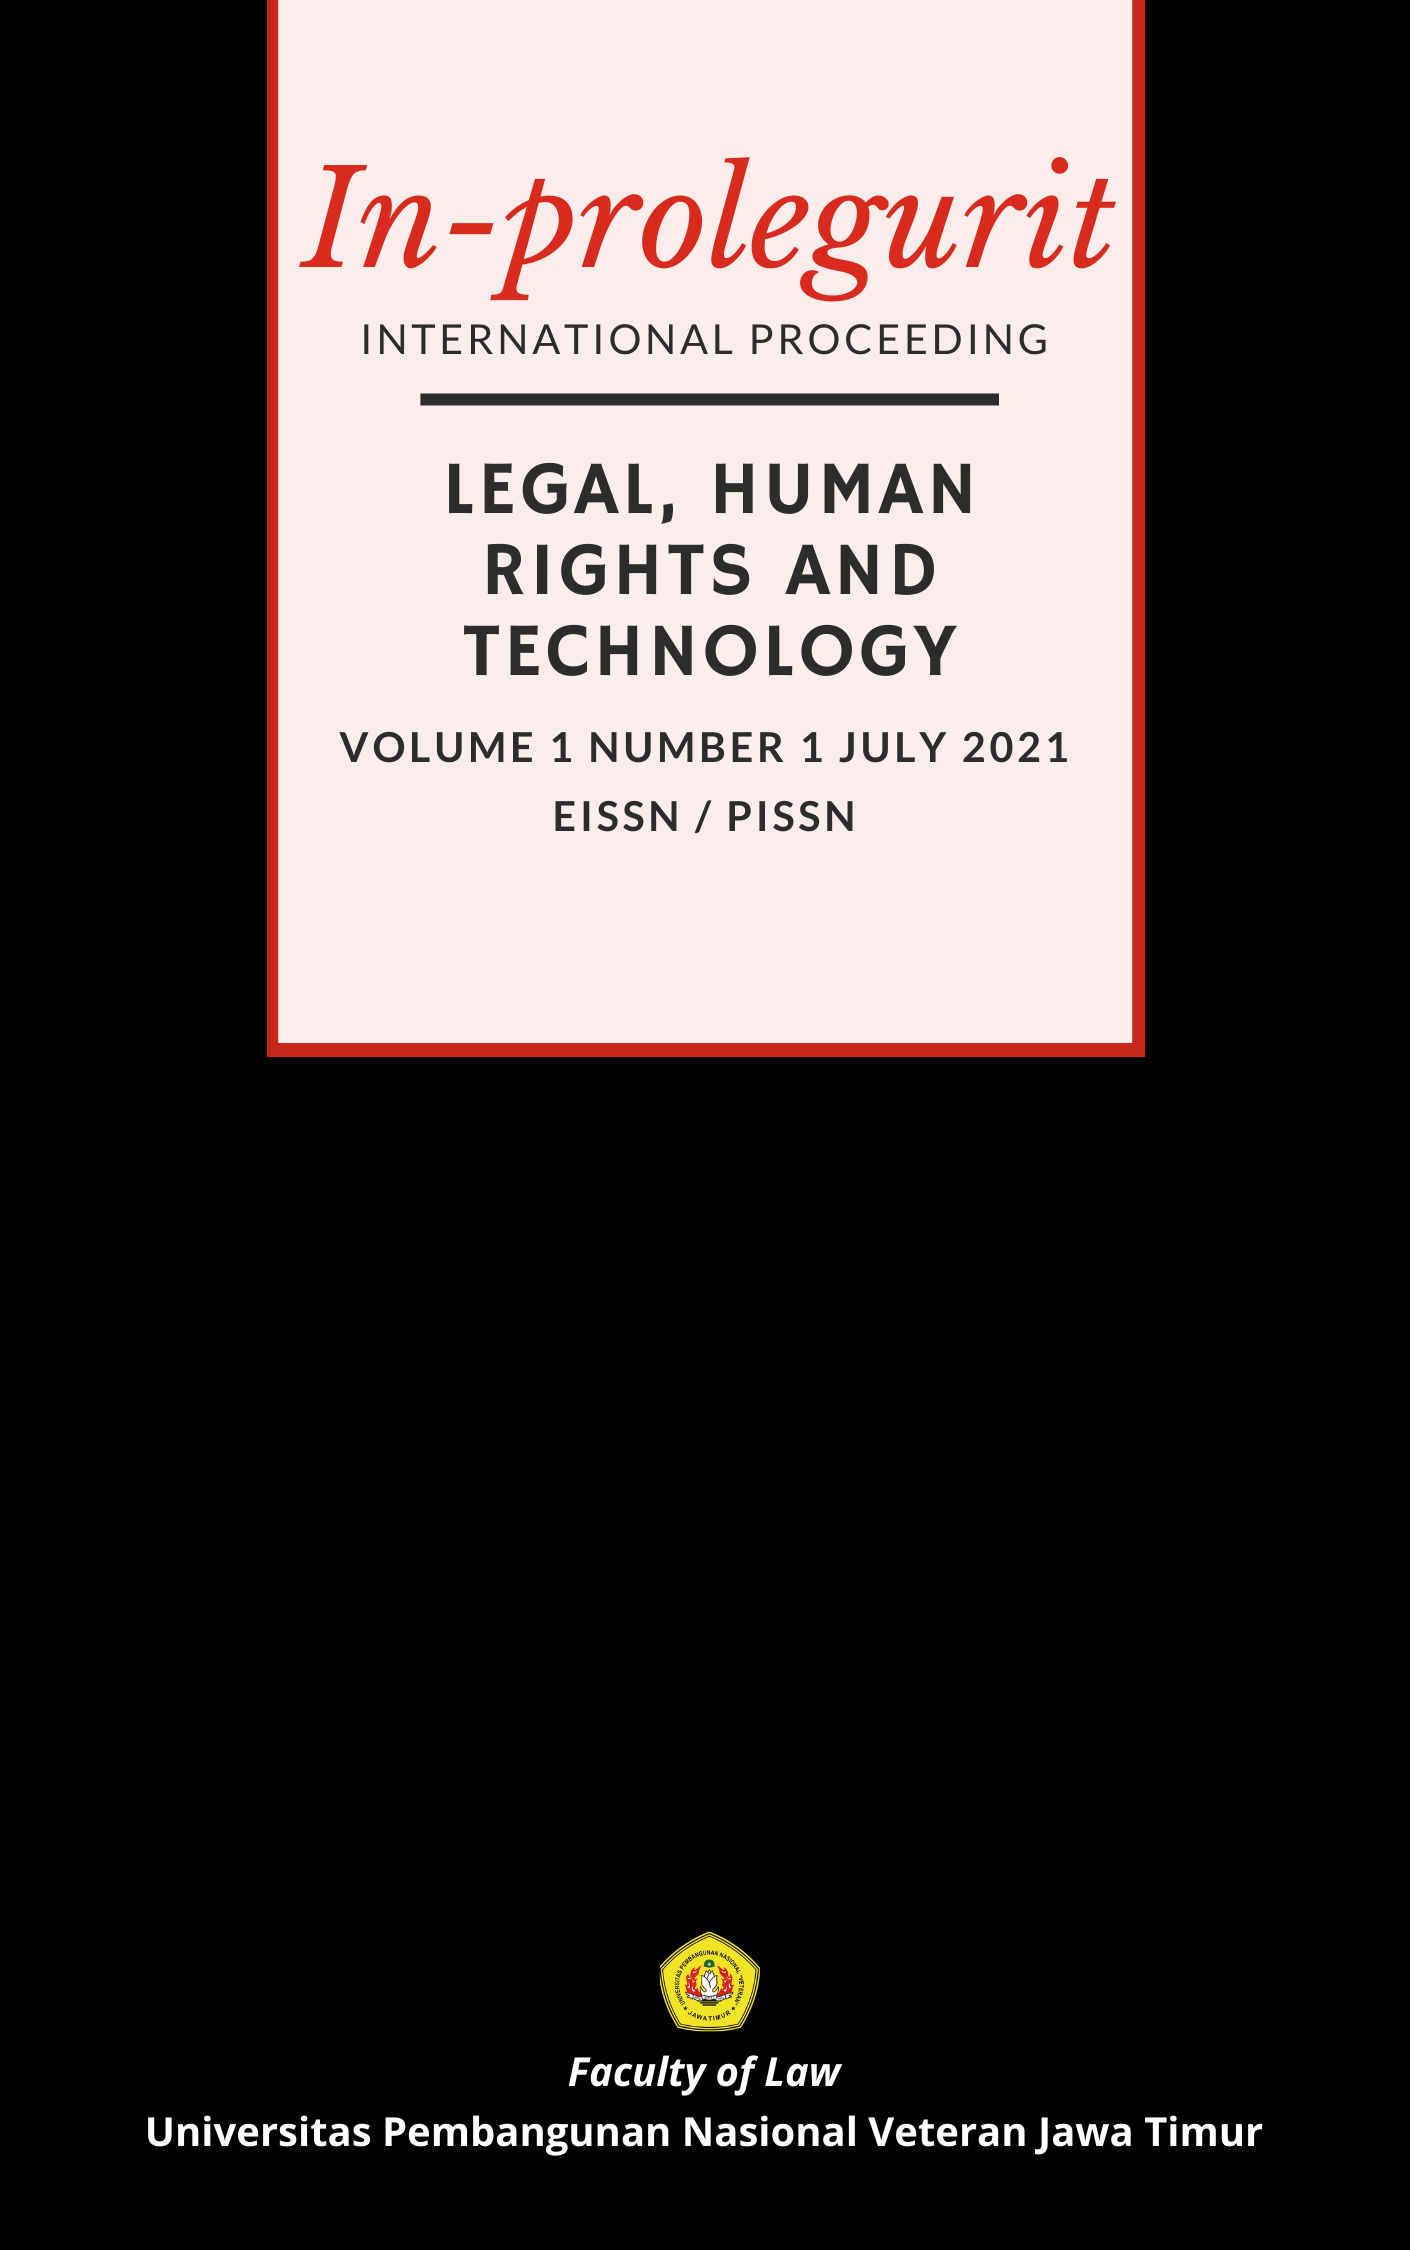 					View Vol. 1 No. 1 (2021): In-Prolegurit (International Proceeding: Legal, Human Rights and Technology)
				